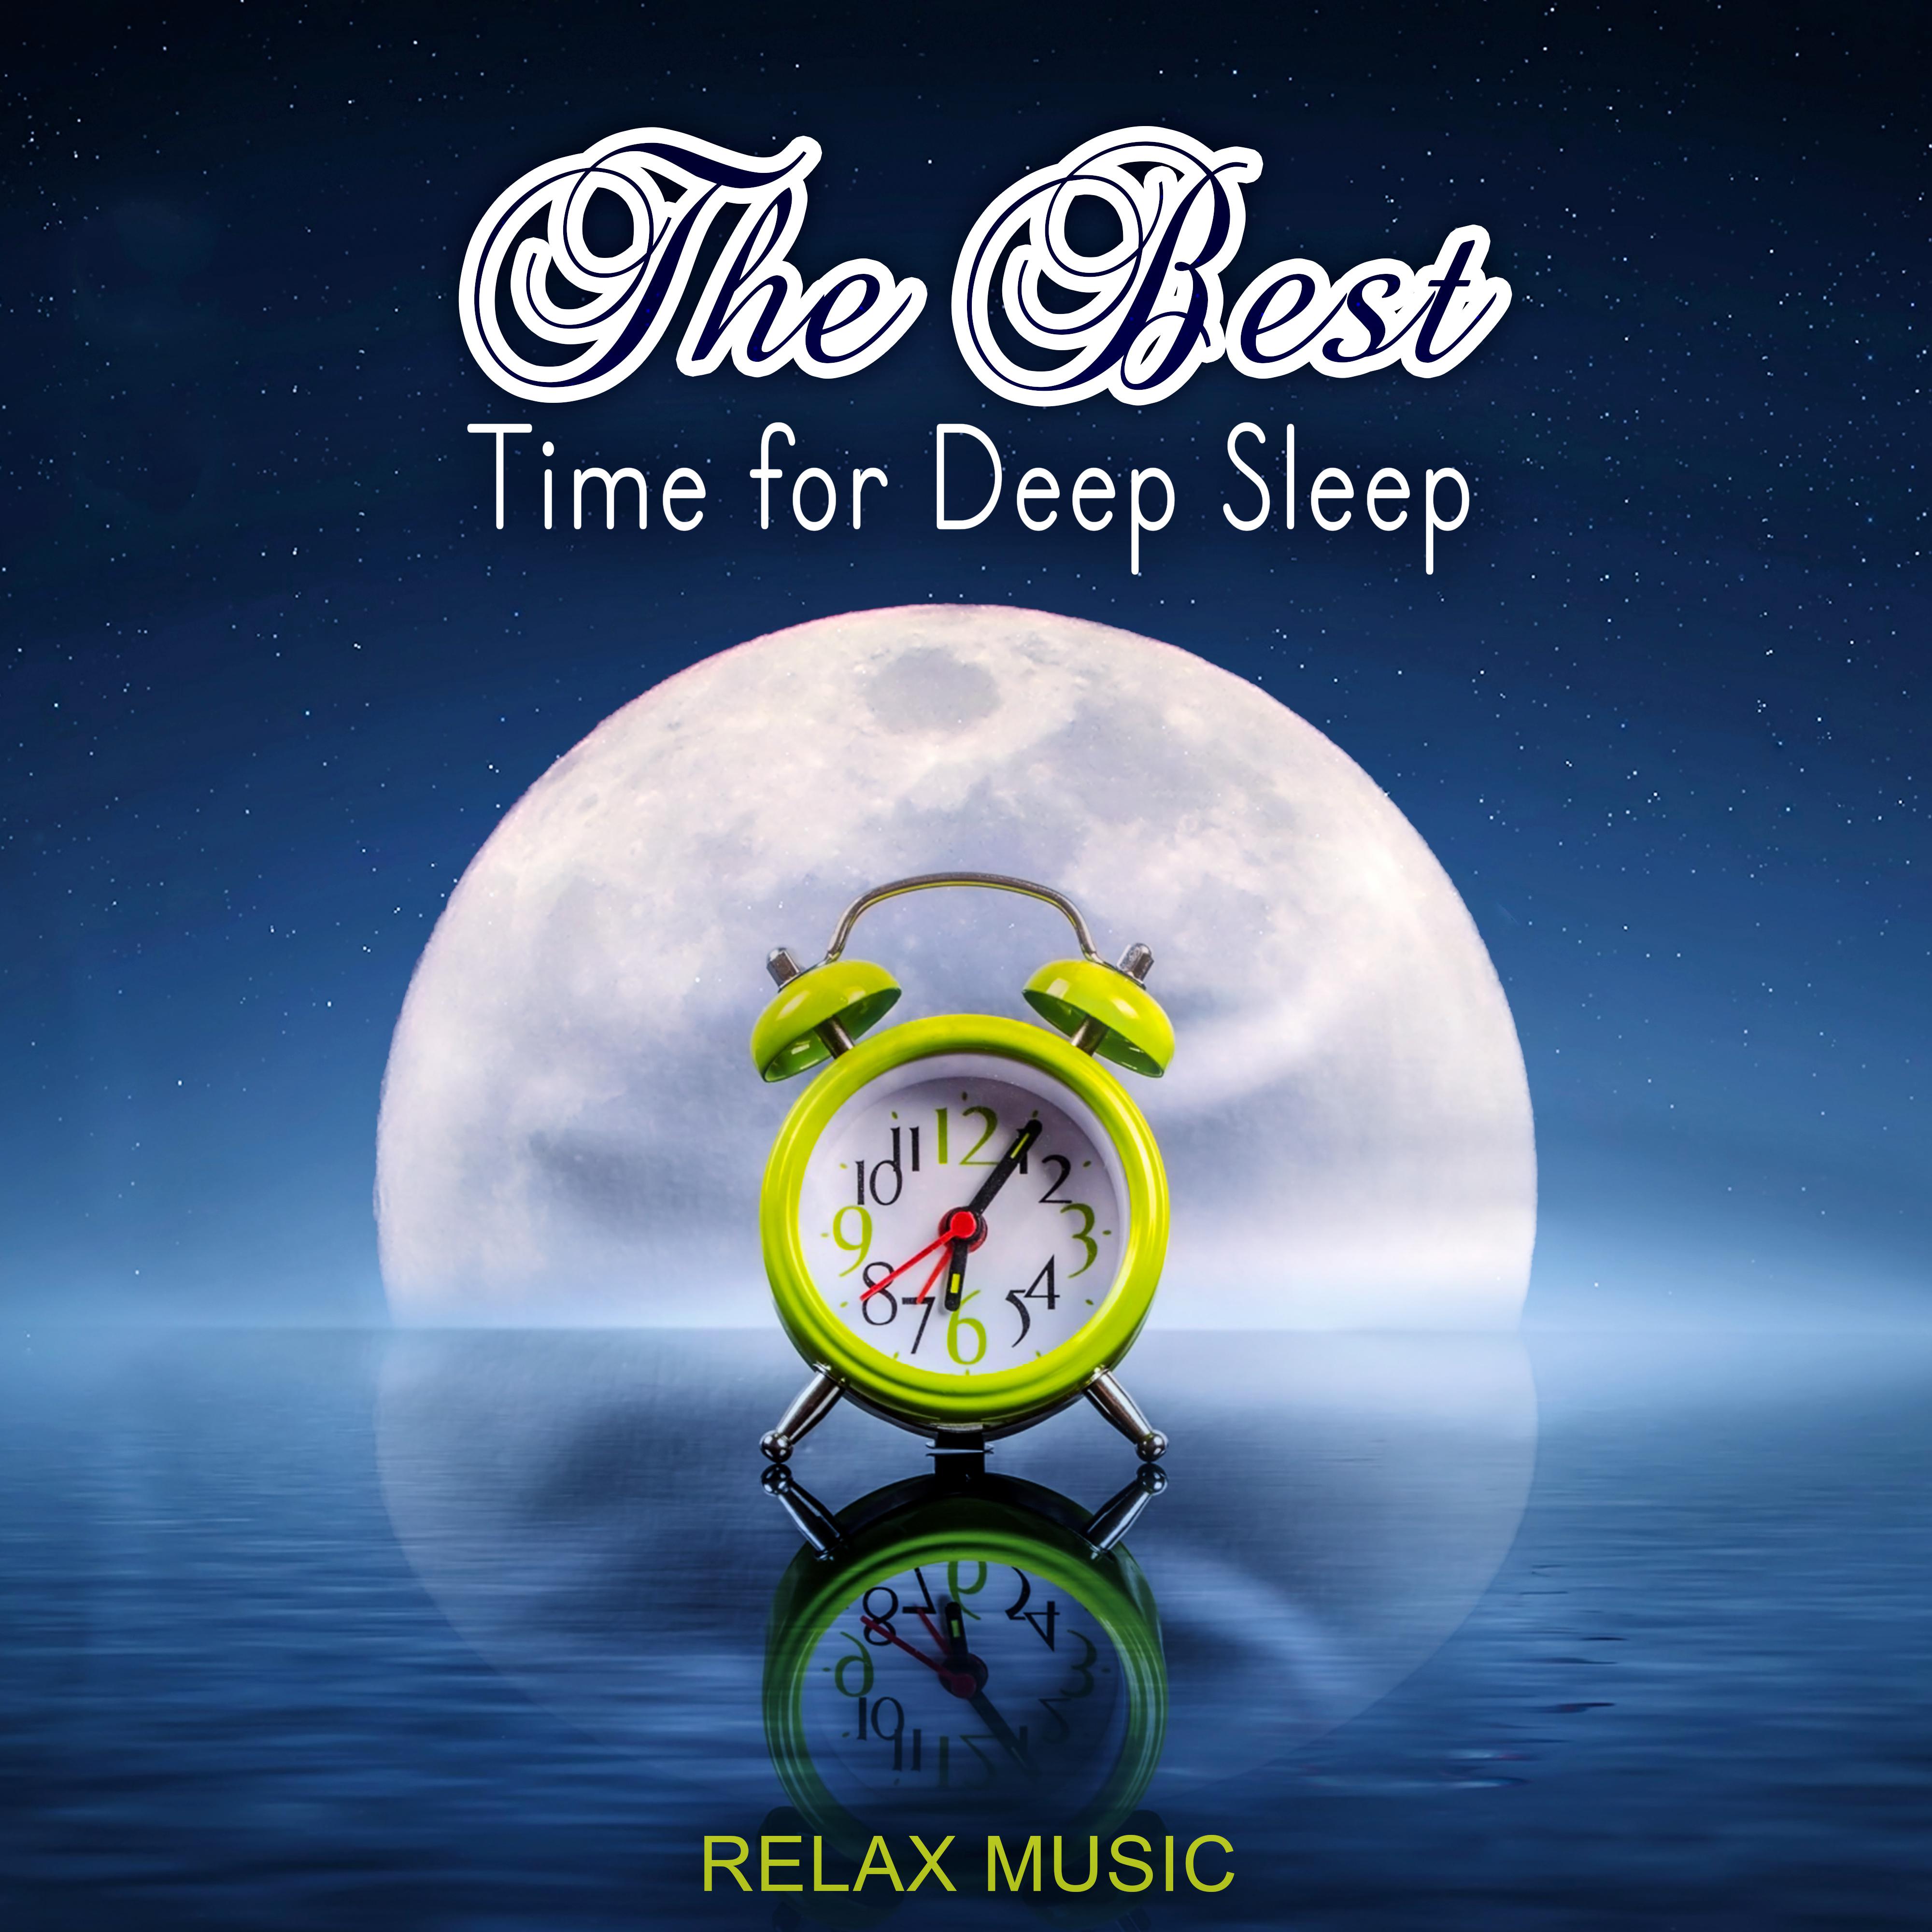 The Best Time for Deep Sleep  Relaxing Therapy Sounds and Sleeping Music to Help You Relax All Night Long, Healing Meditation and Lullaby Songs for Better Sleep